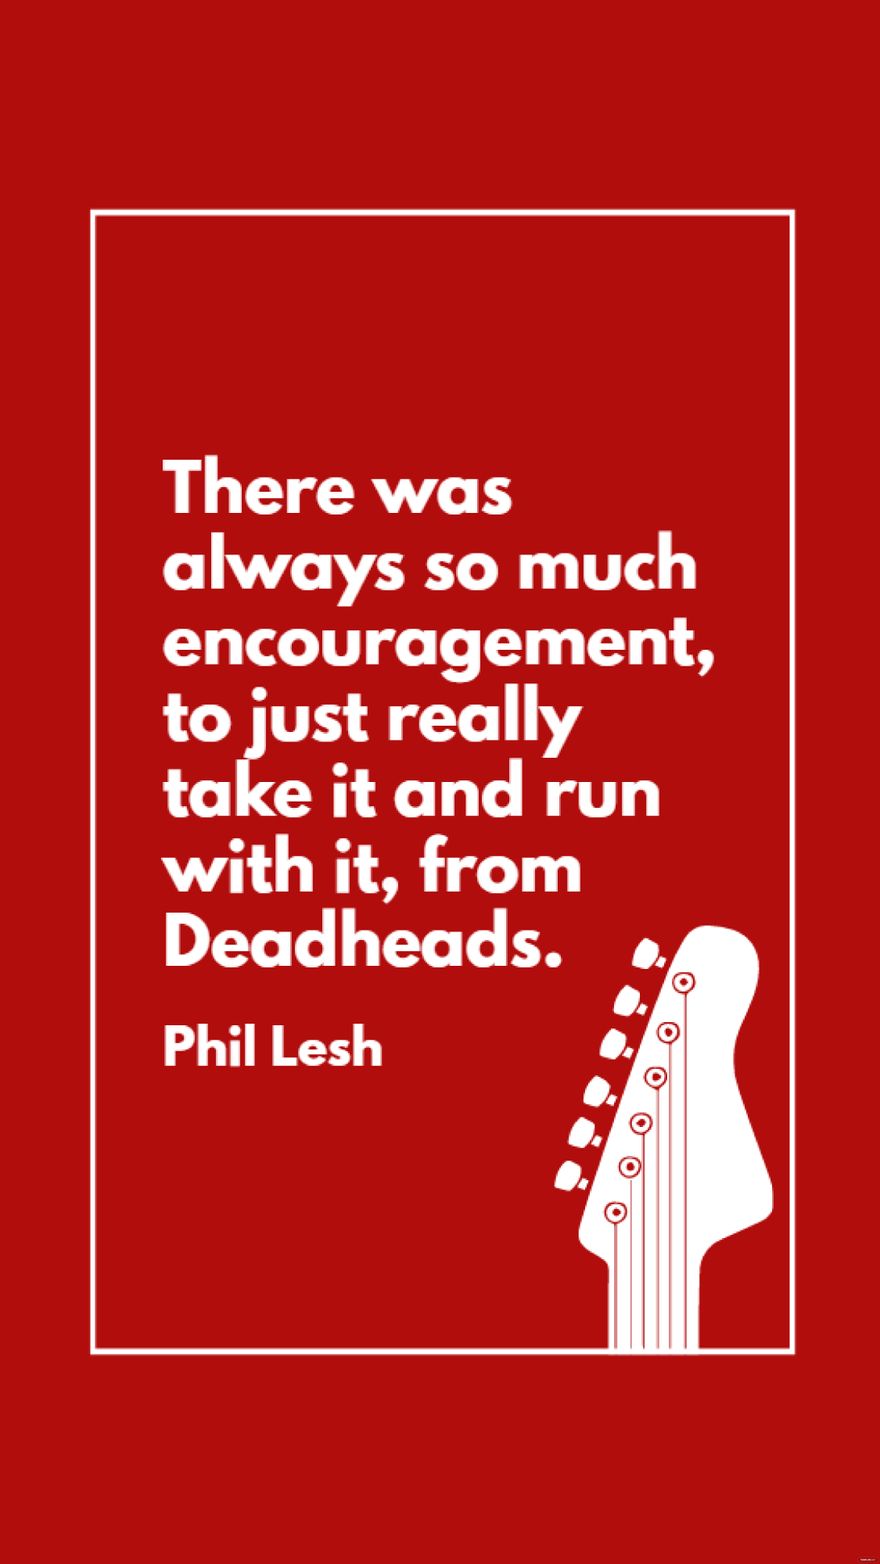 Free Phil Lesh - There was always so much encouragement, to just really take it and run with it, from Deadheads. Template